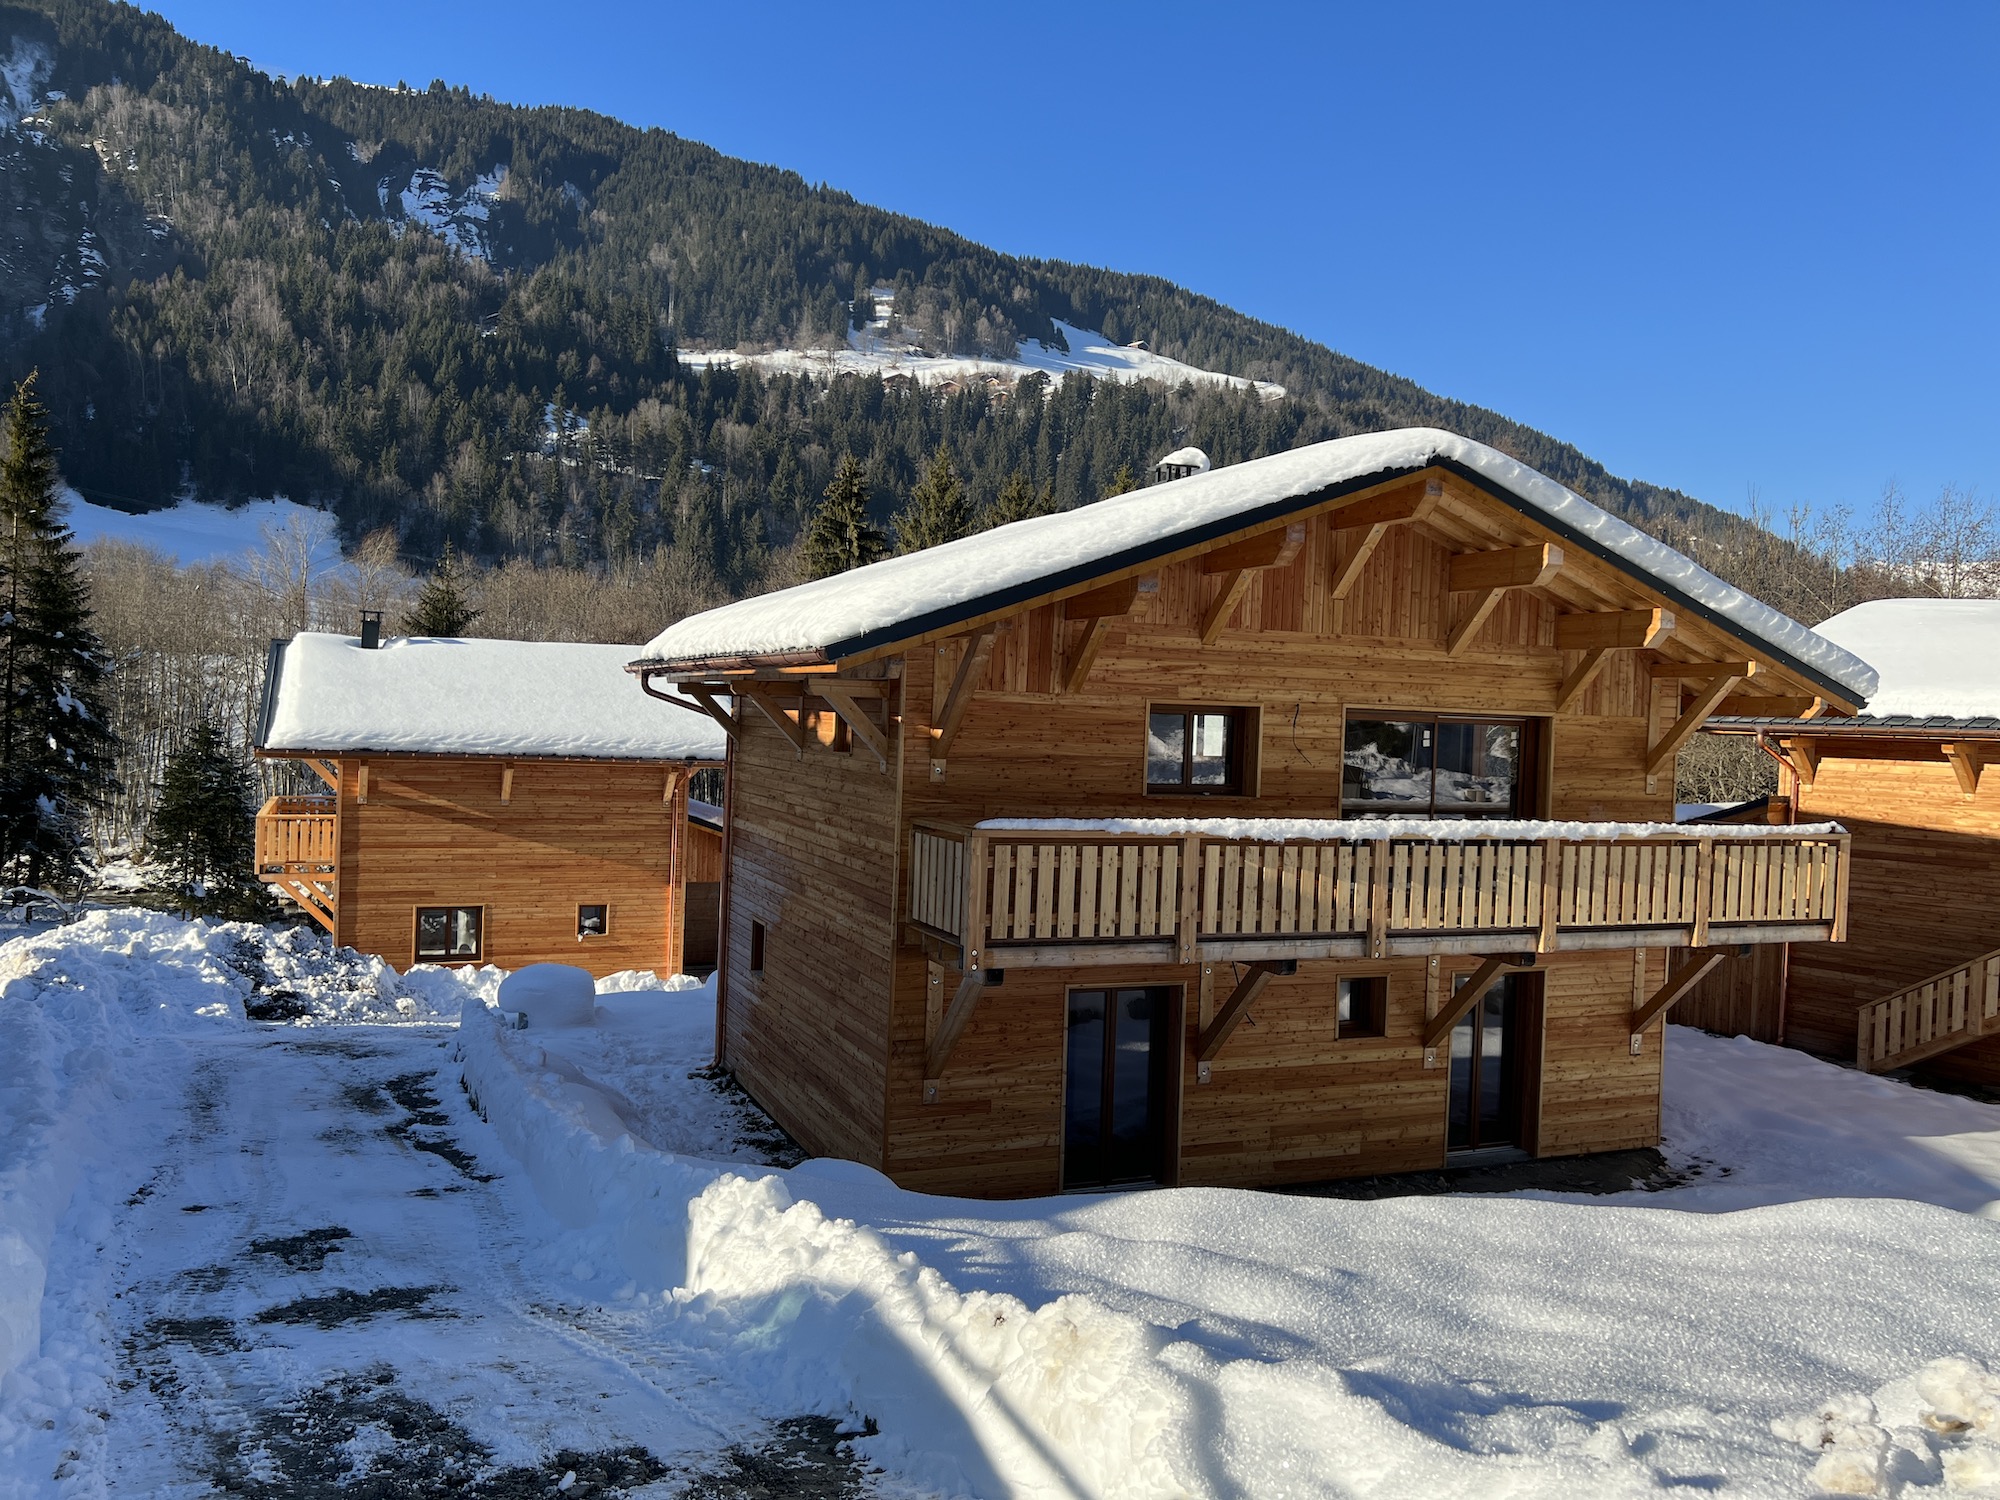 NEW LUXURY CHALETS IN THE ALPS